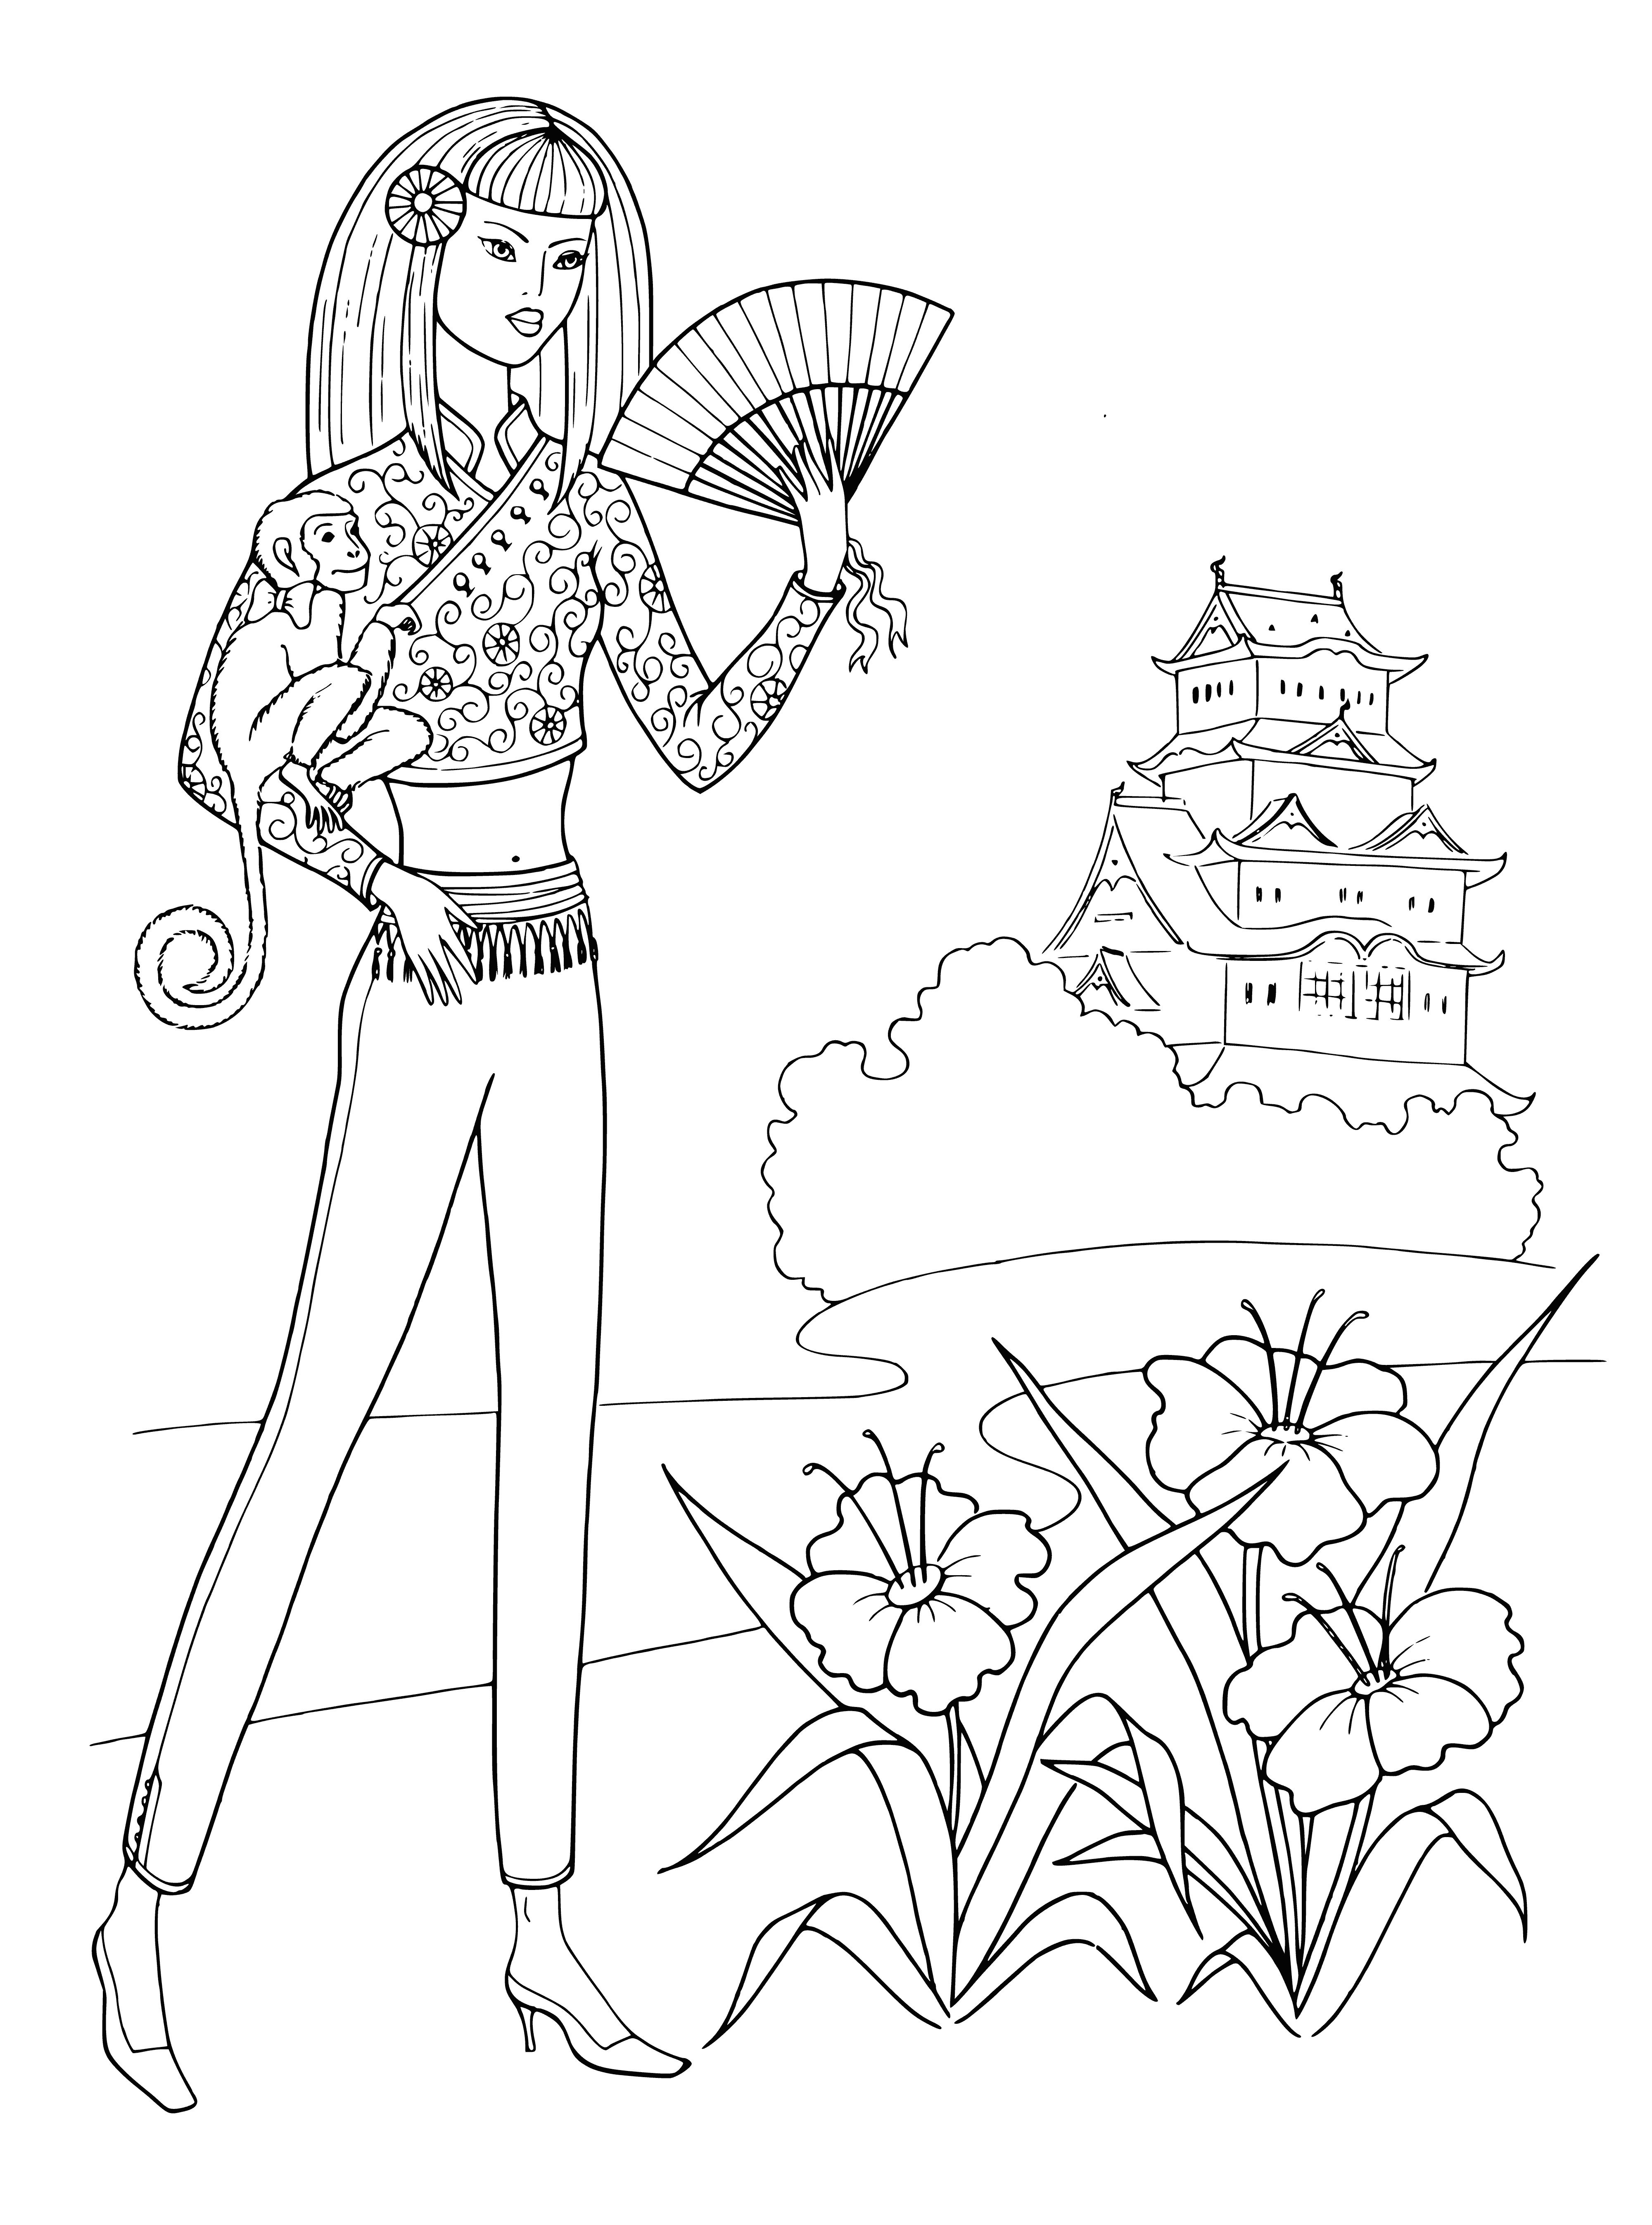 coloring page: Girl and monkey twins smile for the camera, matching outfits of dress and diaper/bowtie.